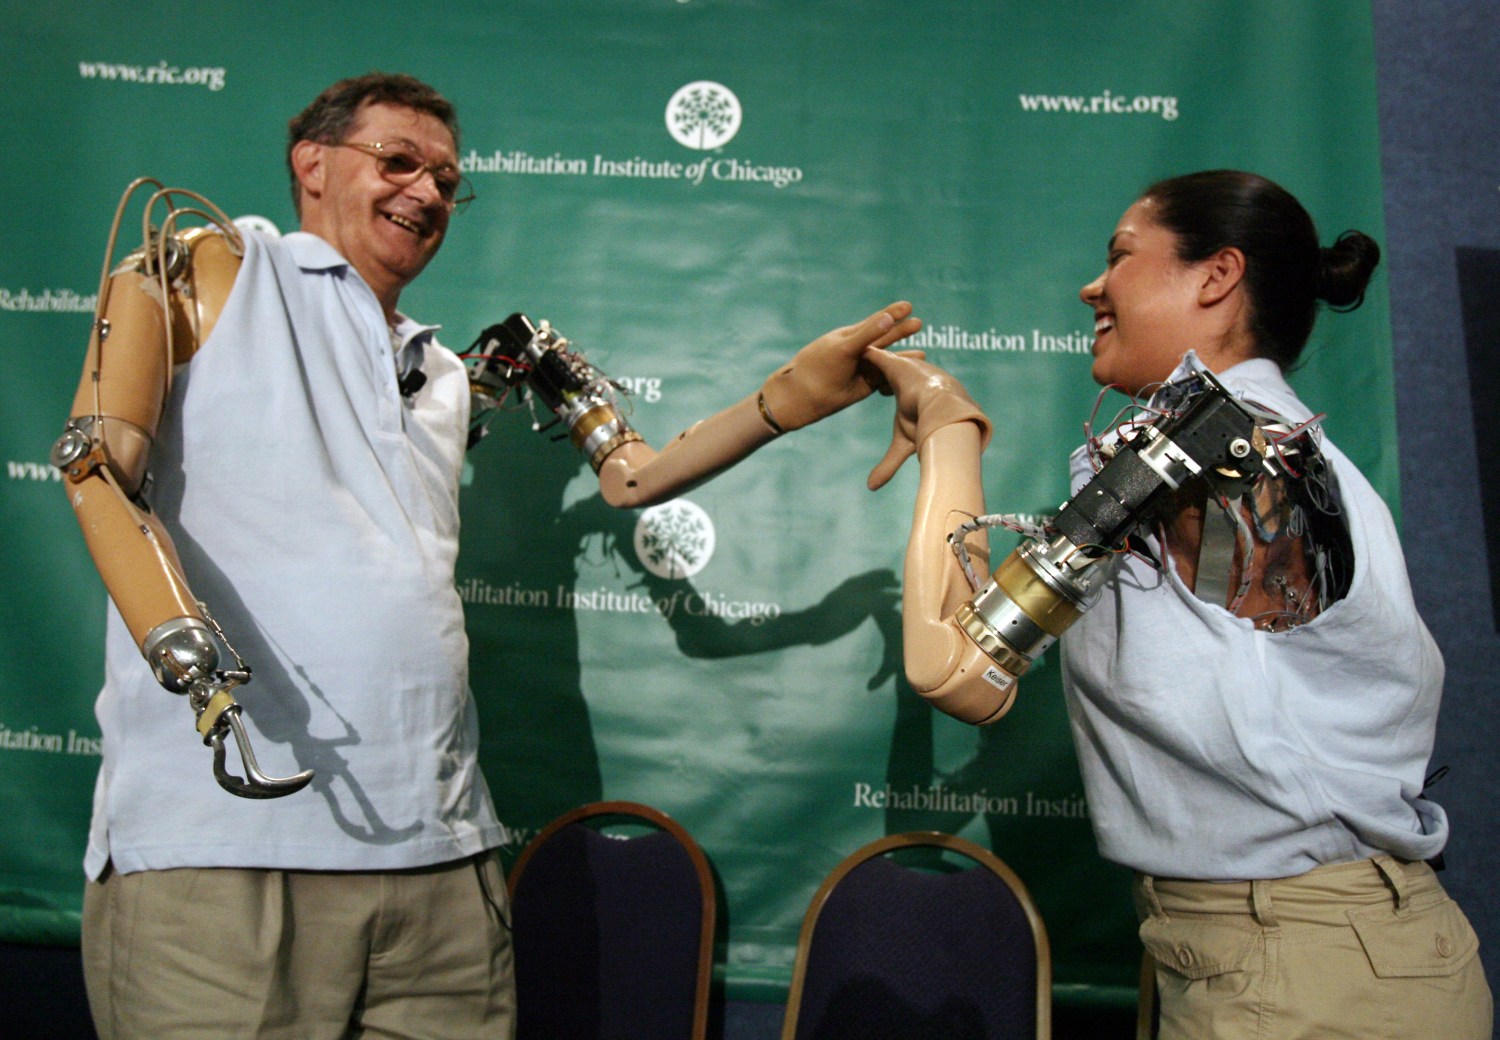 Claudia Mitchell (R), the first woman to receive a bionic arm, uses her new prosthetic arm to "high five" with the first bionic arm recipient Jesse Sullivan at a news conference in Washington September 14, 2006. REUTERS/Jason Reed